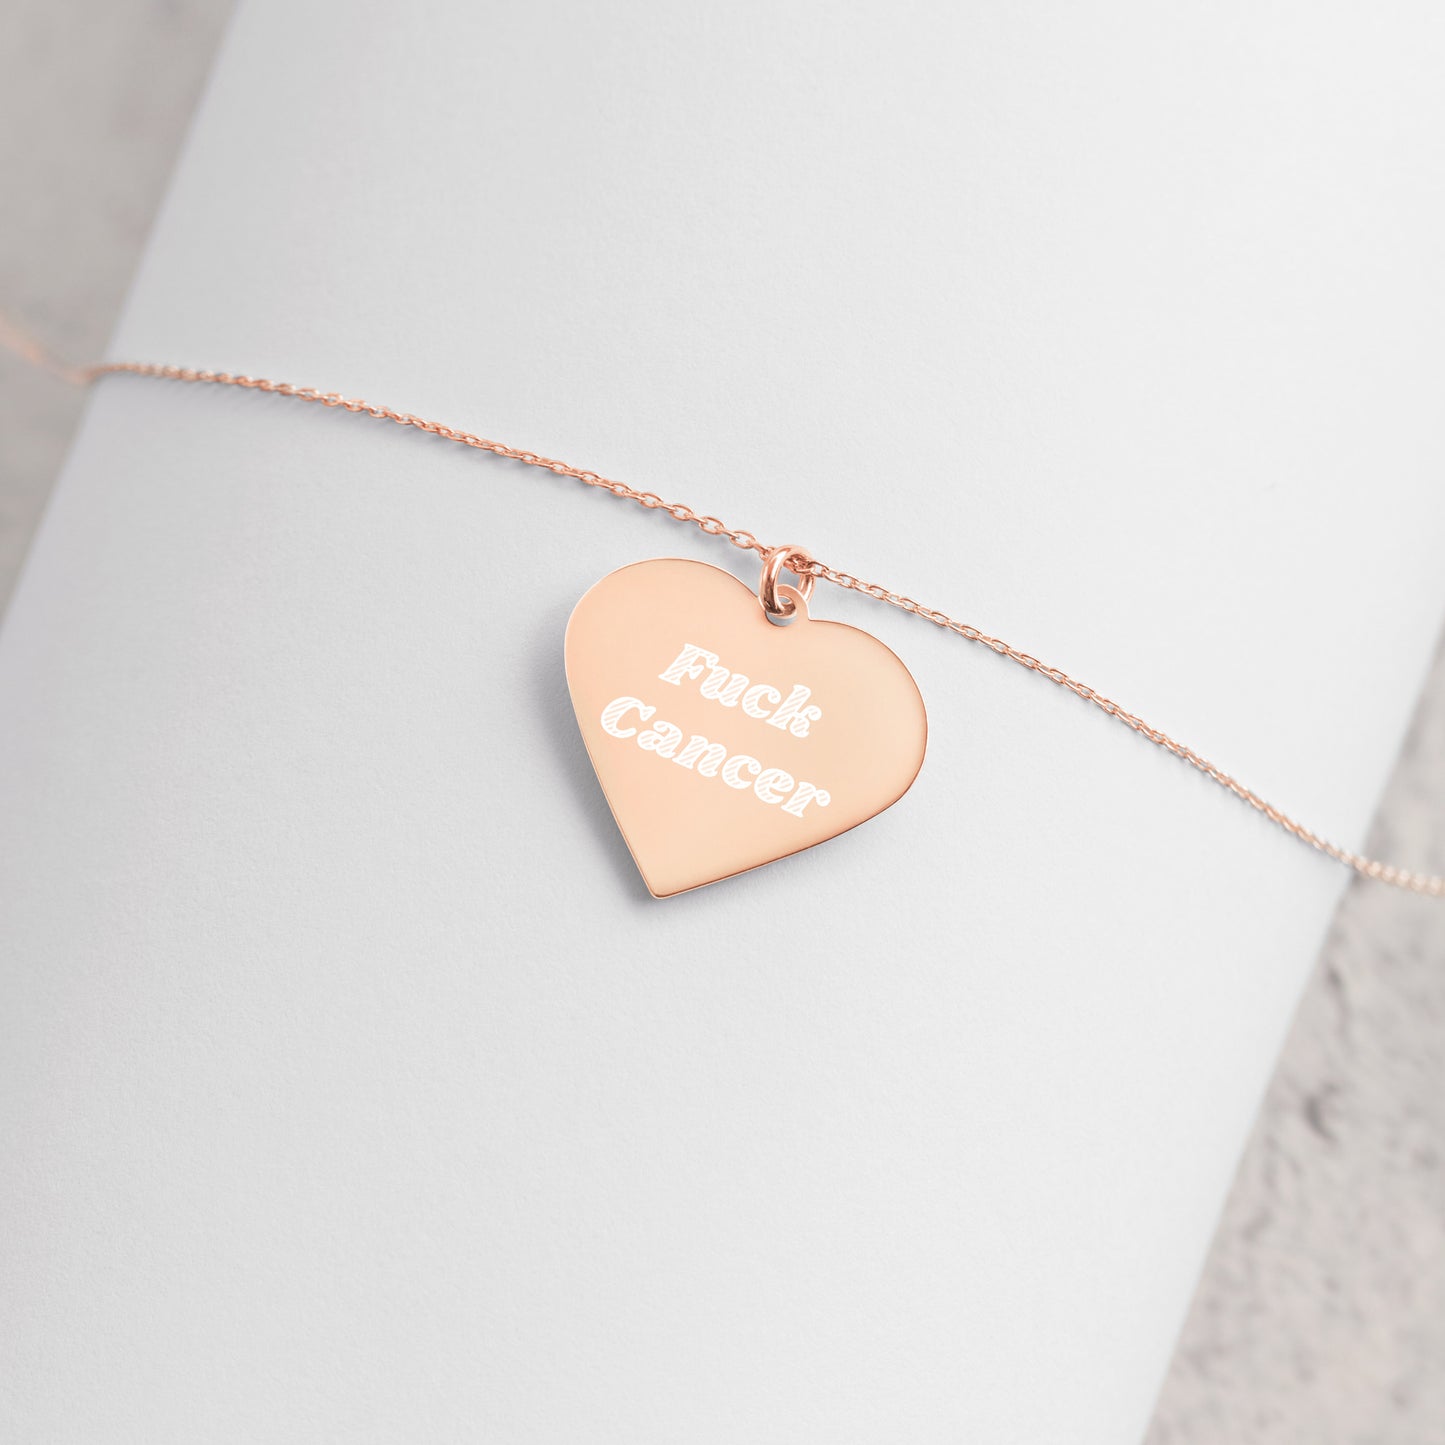 F*ck Cancer Engraved Silver Heart Necklace